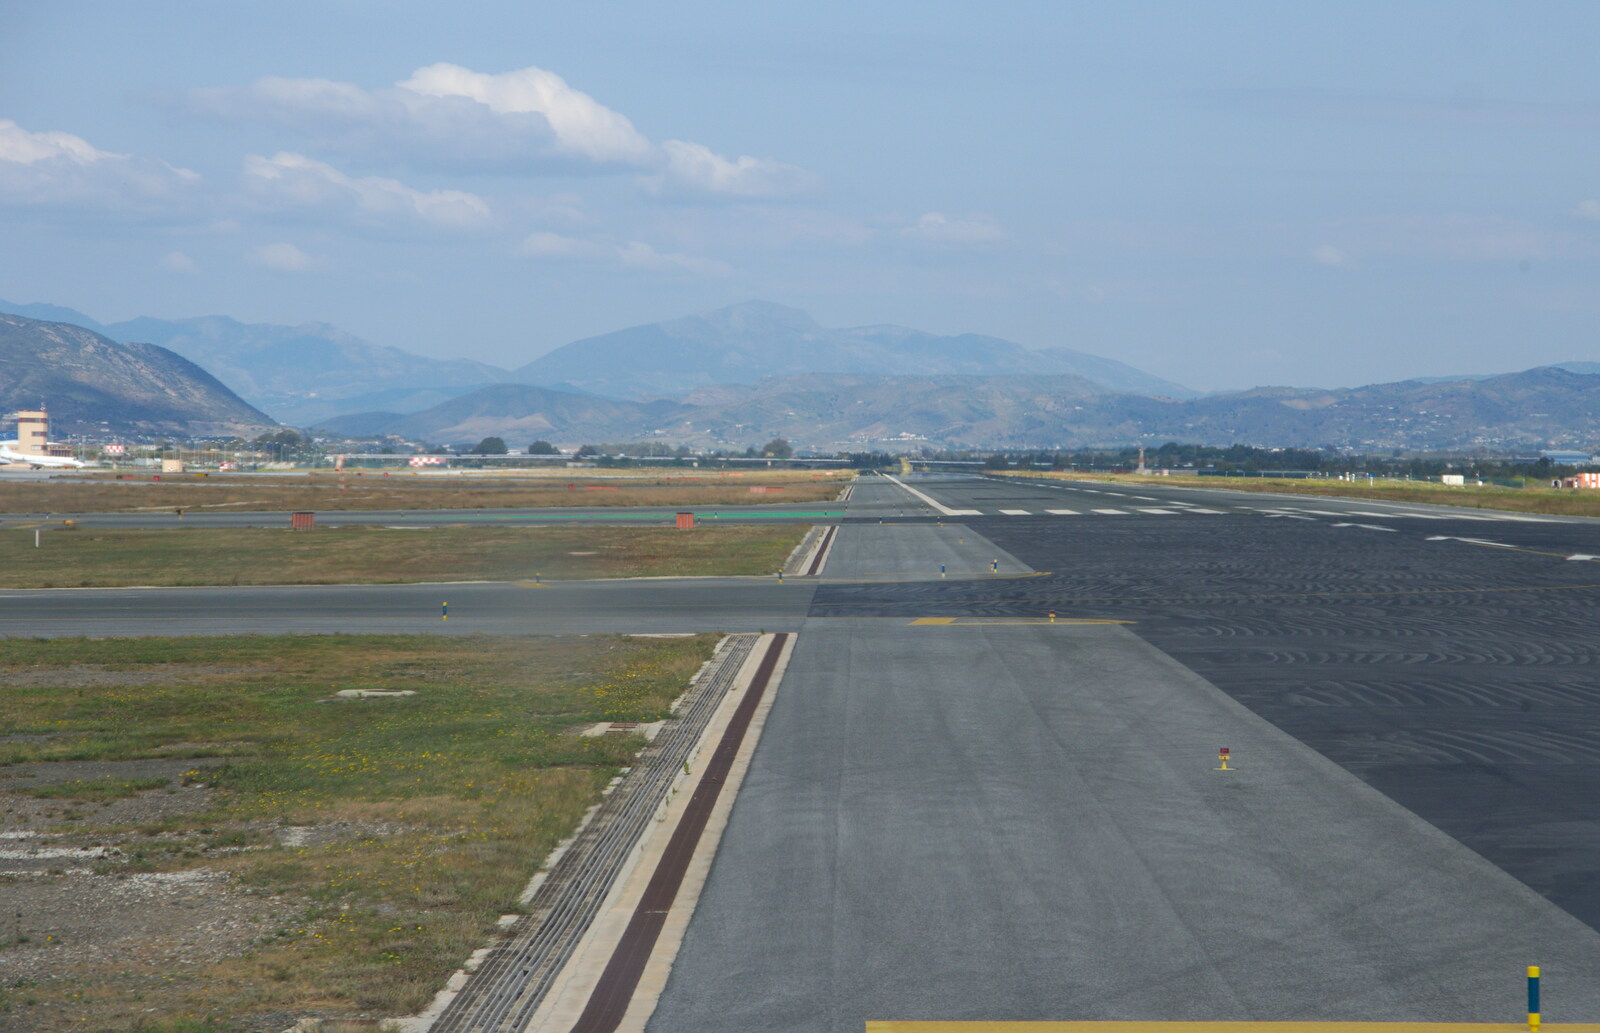 Málaga's runway from An Easter Parade, Nerja, Andalusia, Spain - 21st April 2019